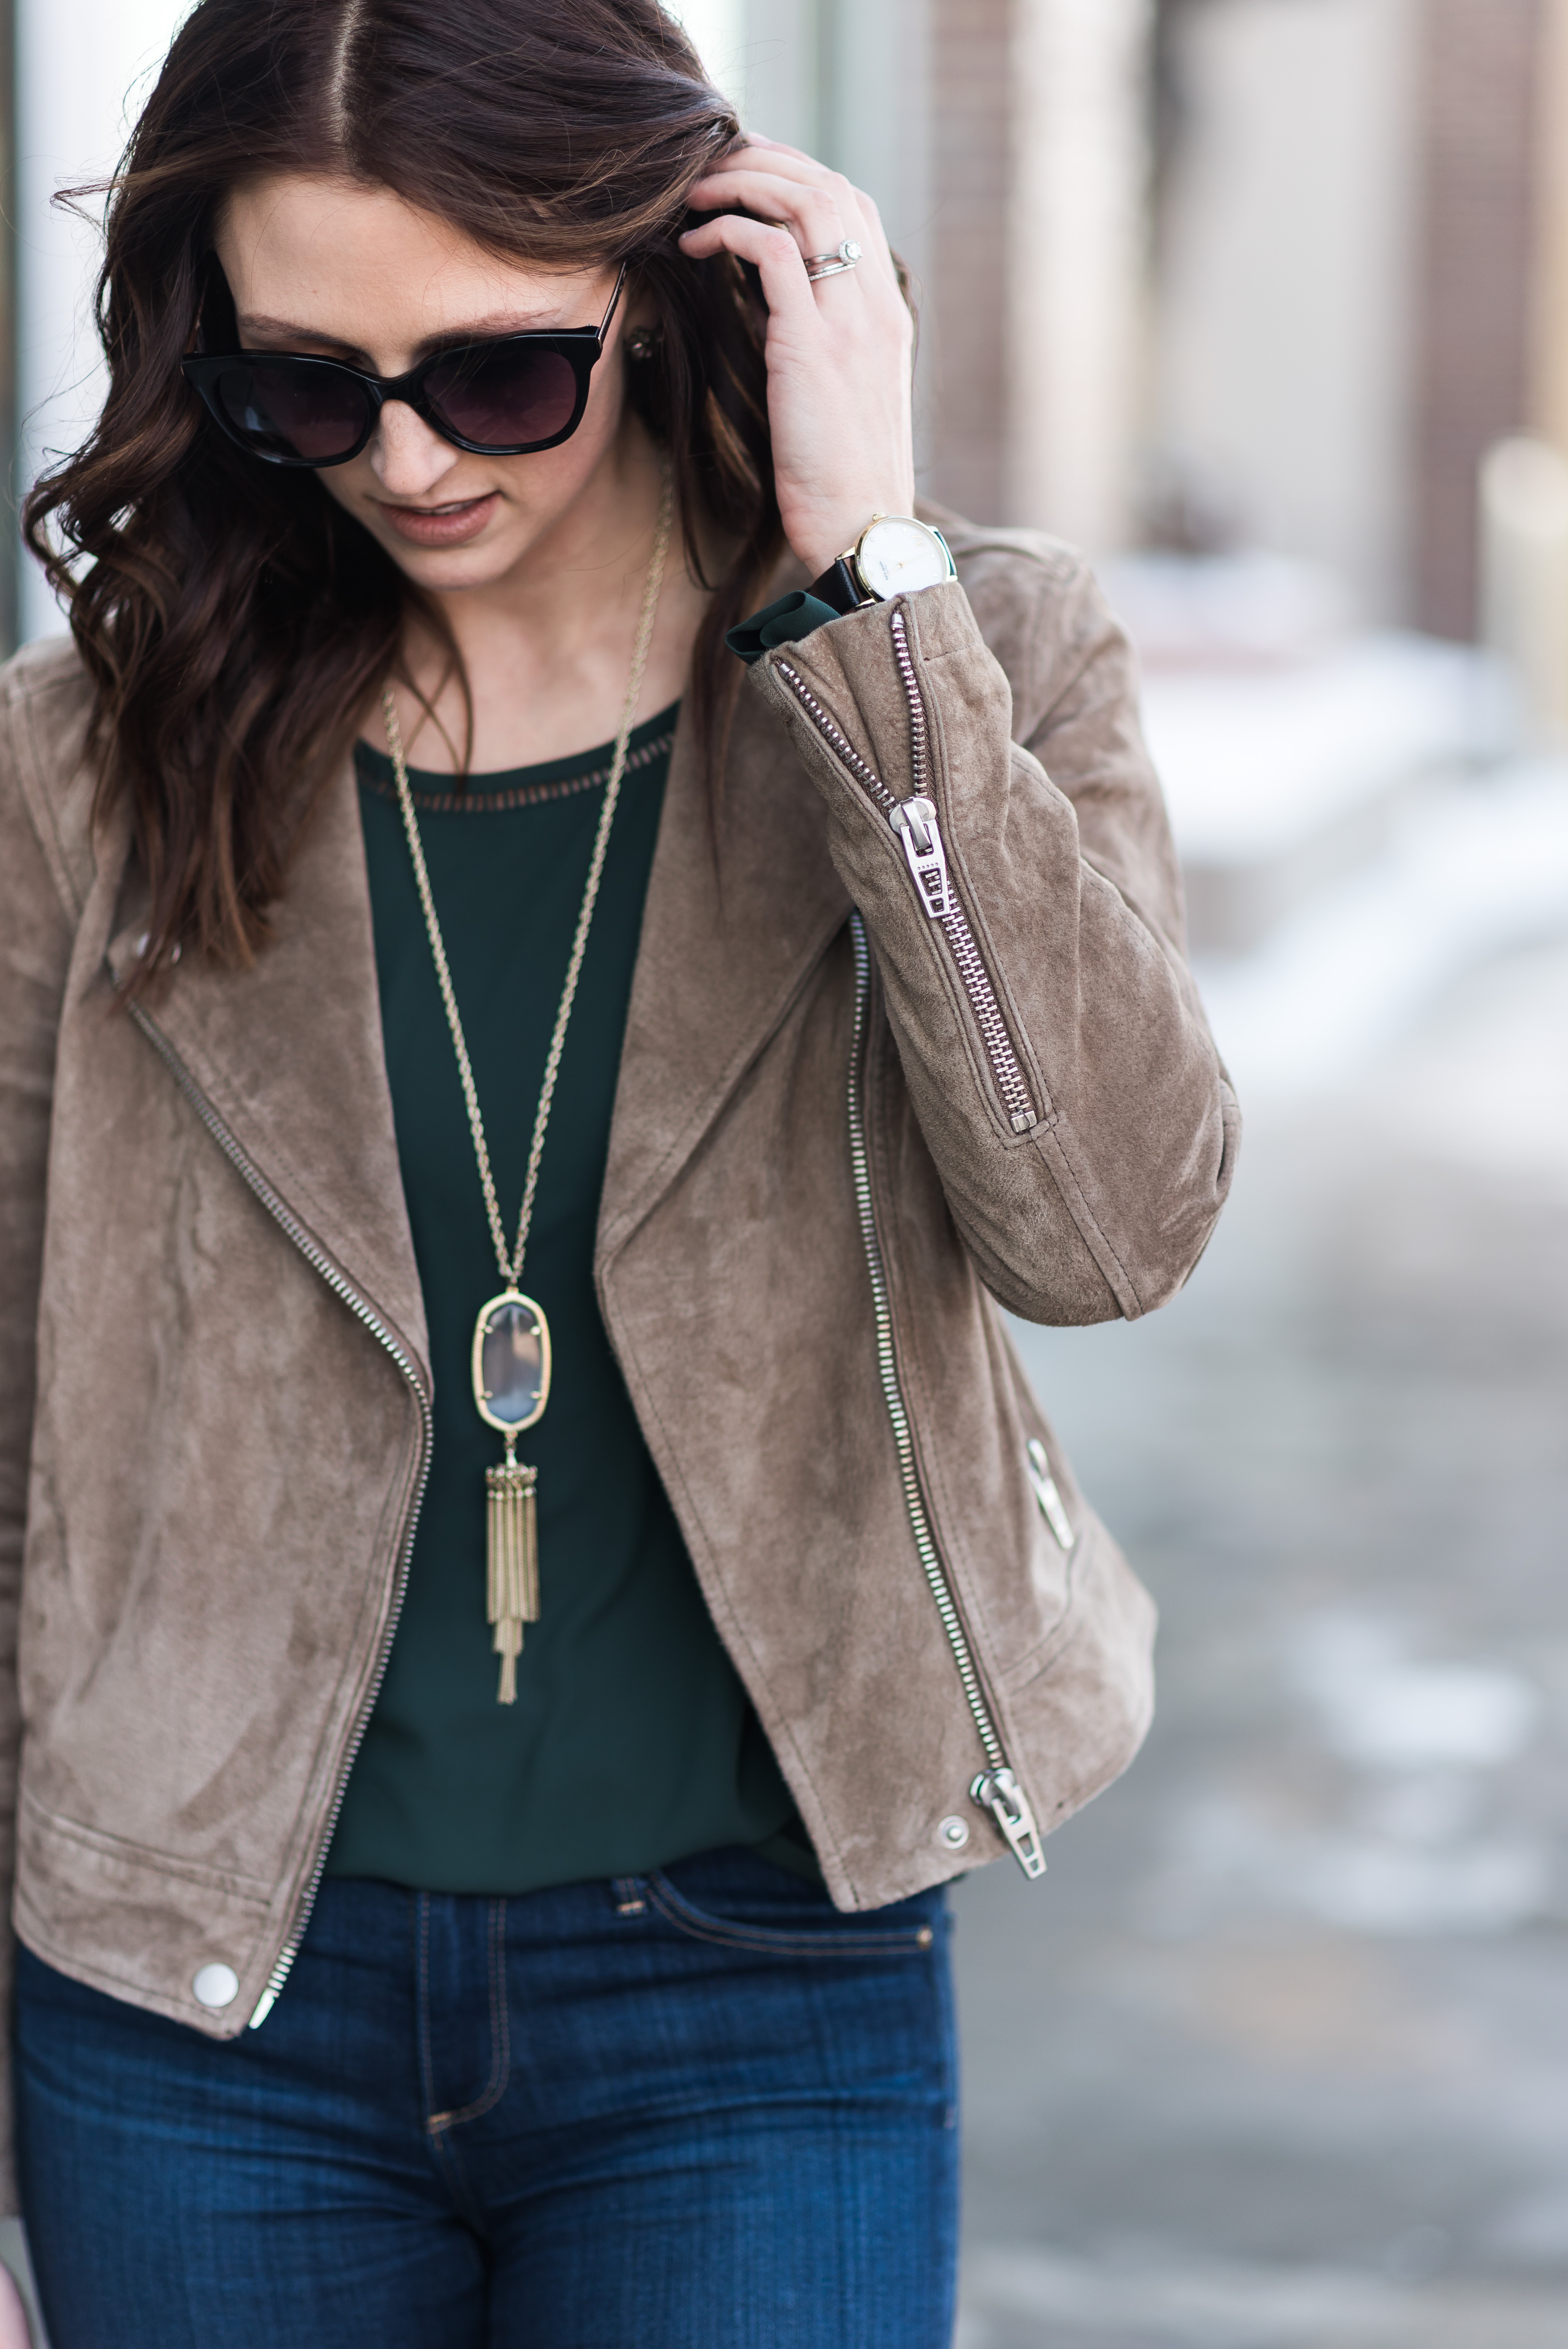 Suede Jacket Outfit | Midwest In Style